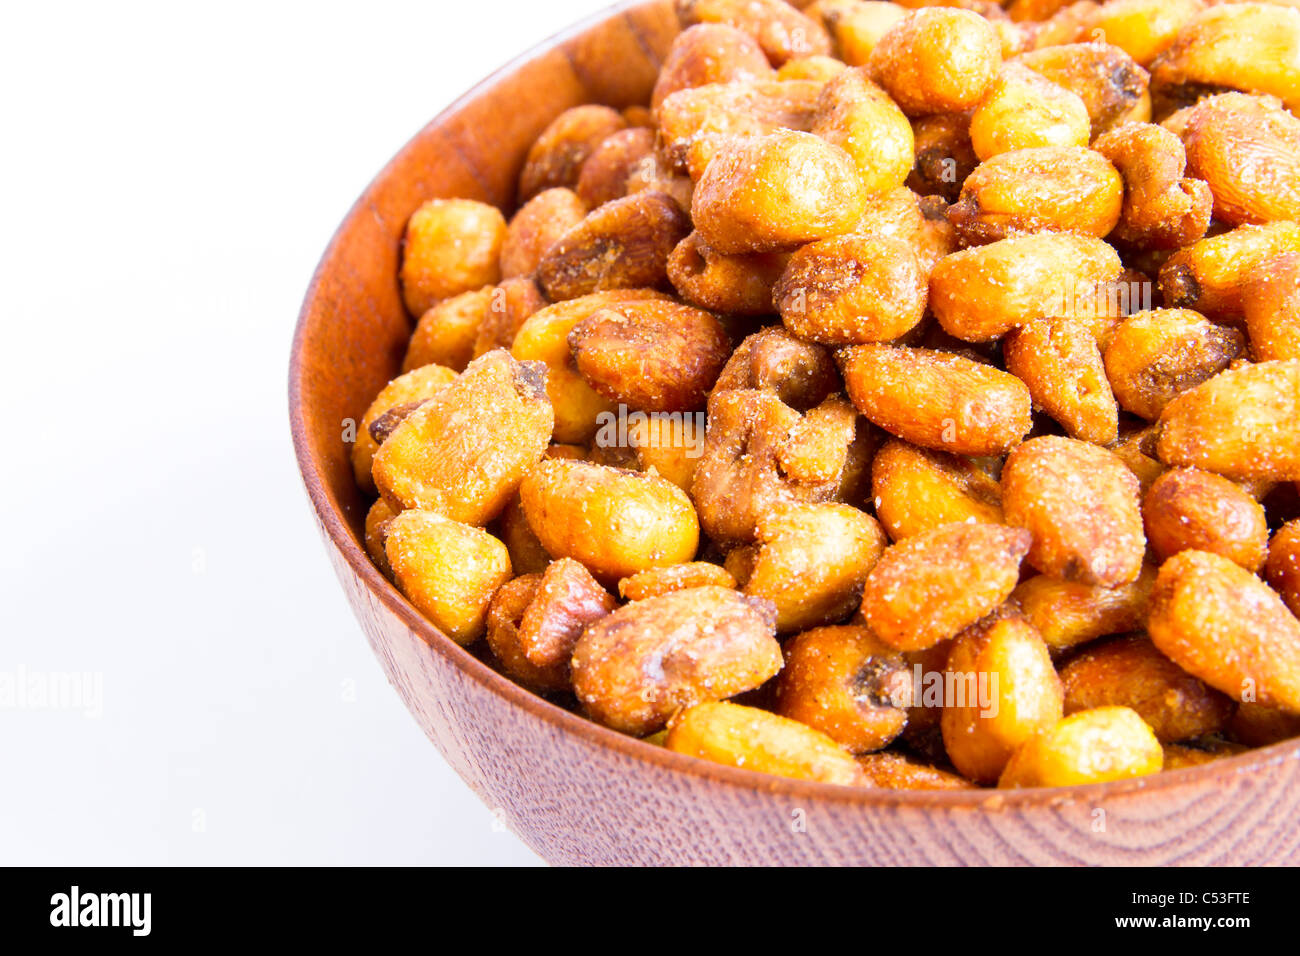 A cherry wood bowl of shelled grains corn fried on a white background. Stock Photo